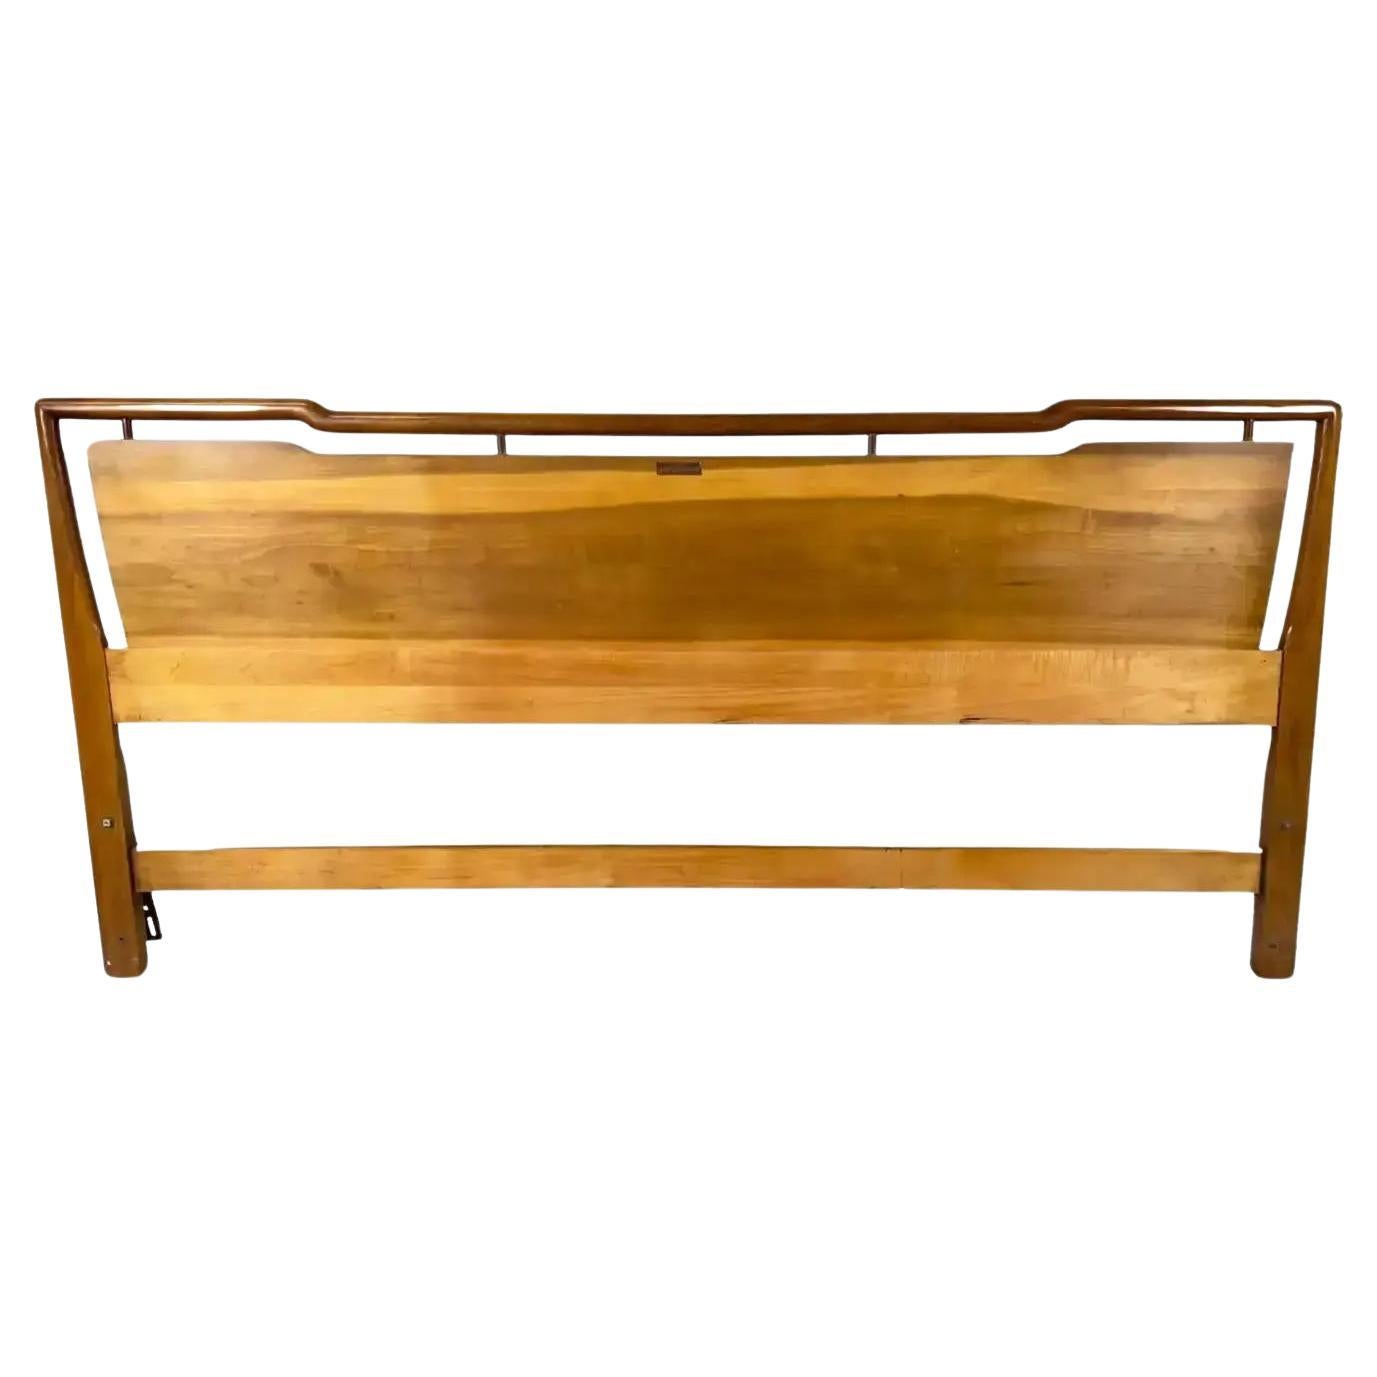 A John Widdicomb Mid Century Modern King size headboard. Crafted from the finest walnut, this headboard boasts exquisite grains that speak to its superior quality and attention to detail. Its geometrically inspired shape adds a touch of modern